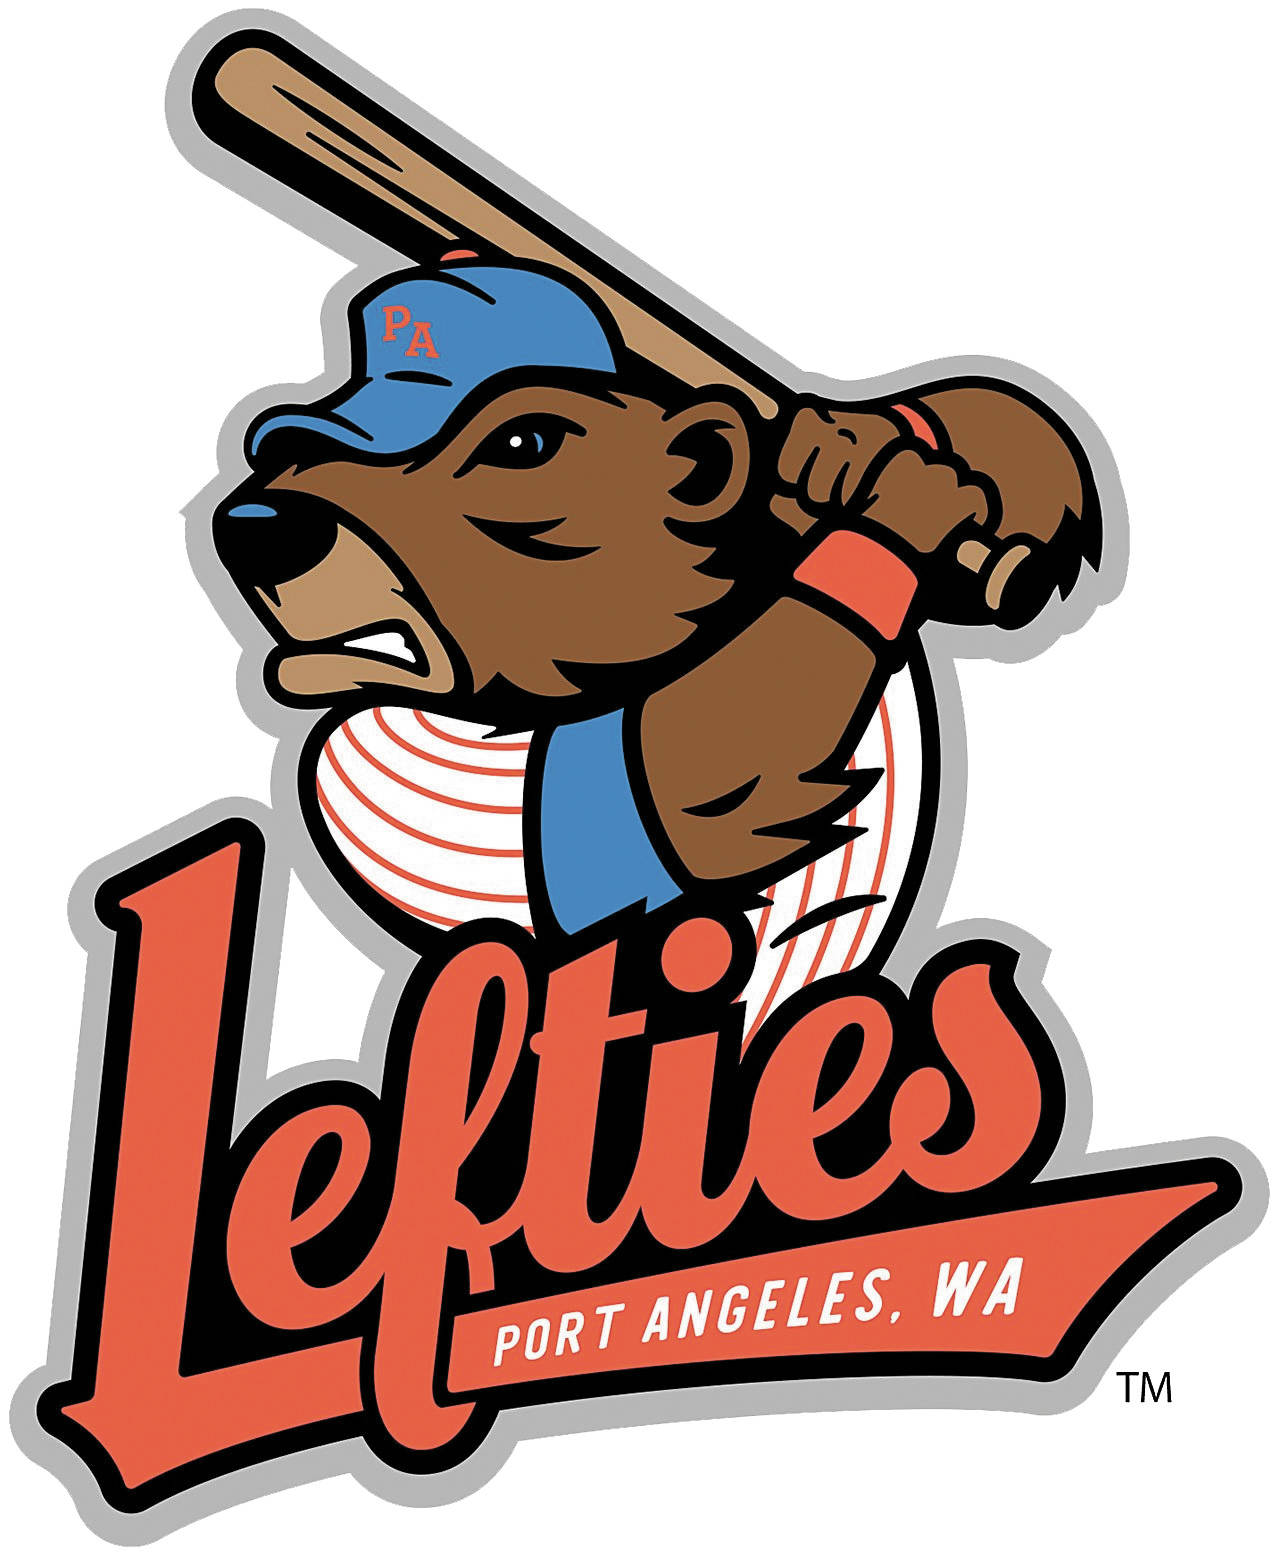 LEFTIES: Losing skid reaches six games in close loss to Yakima Valley